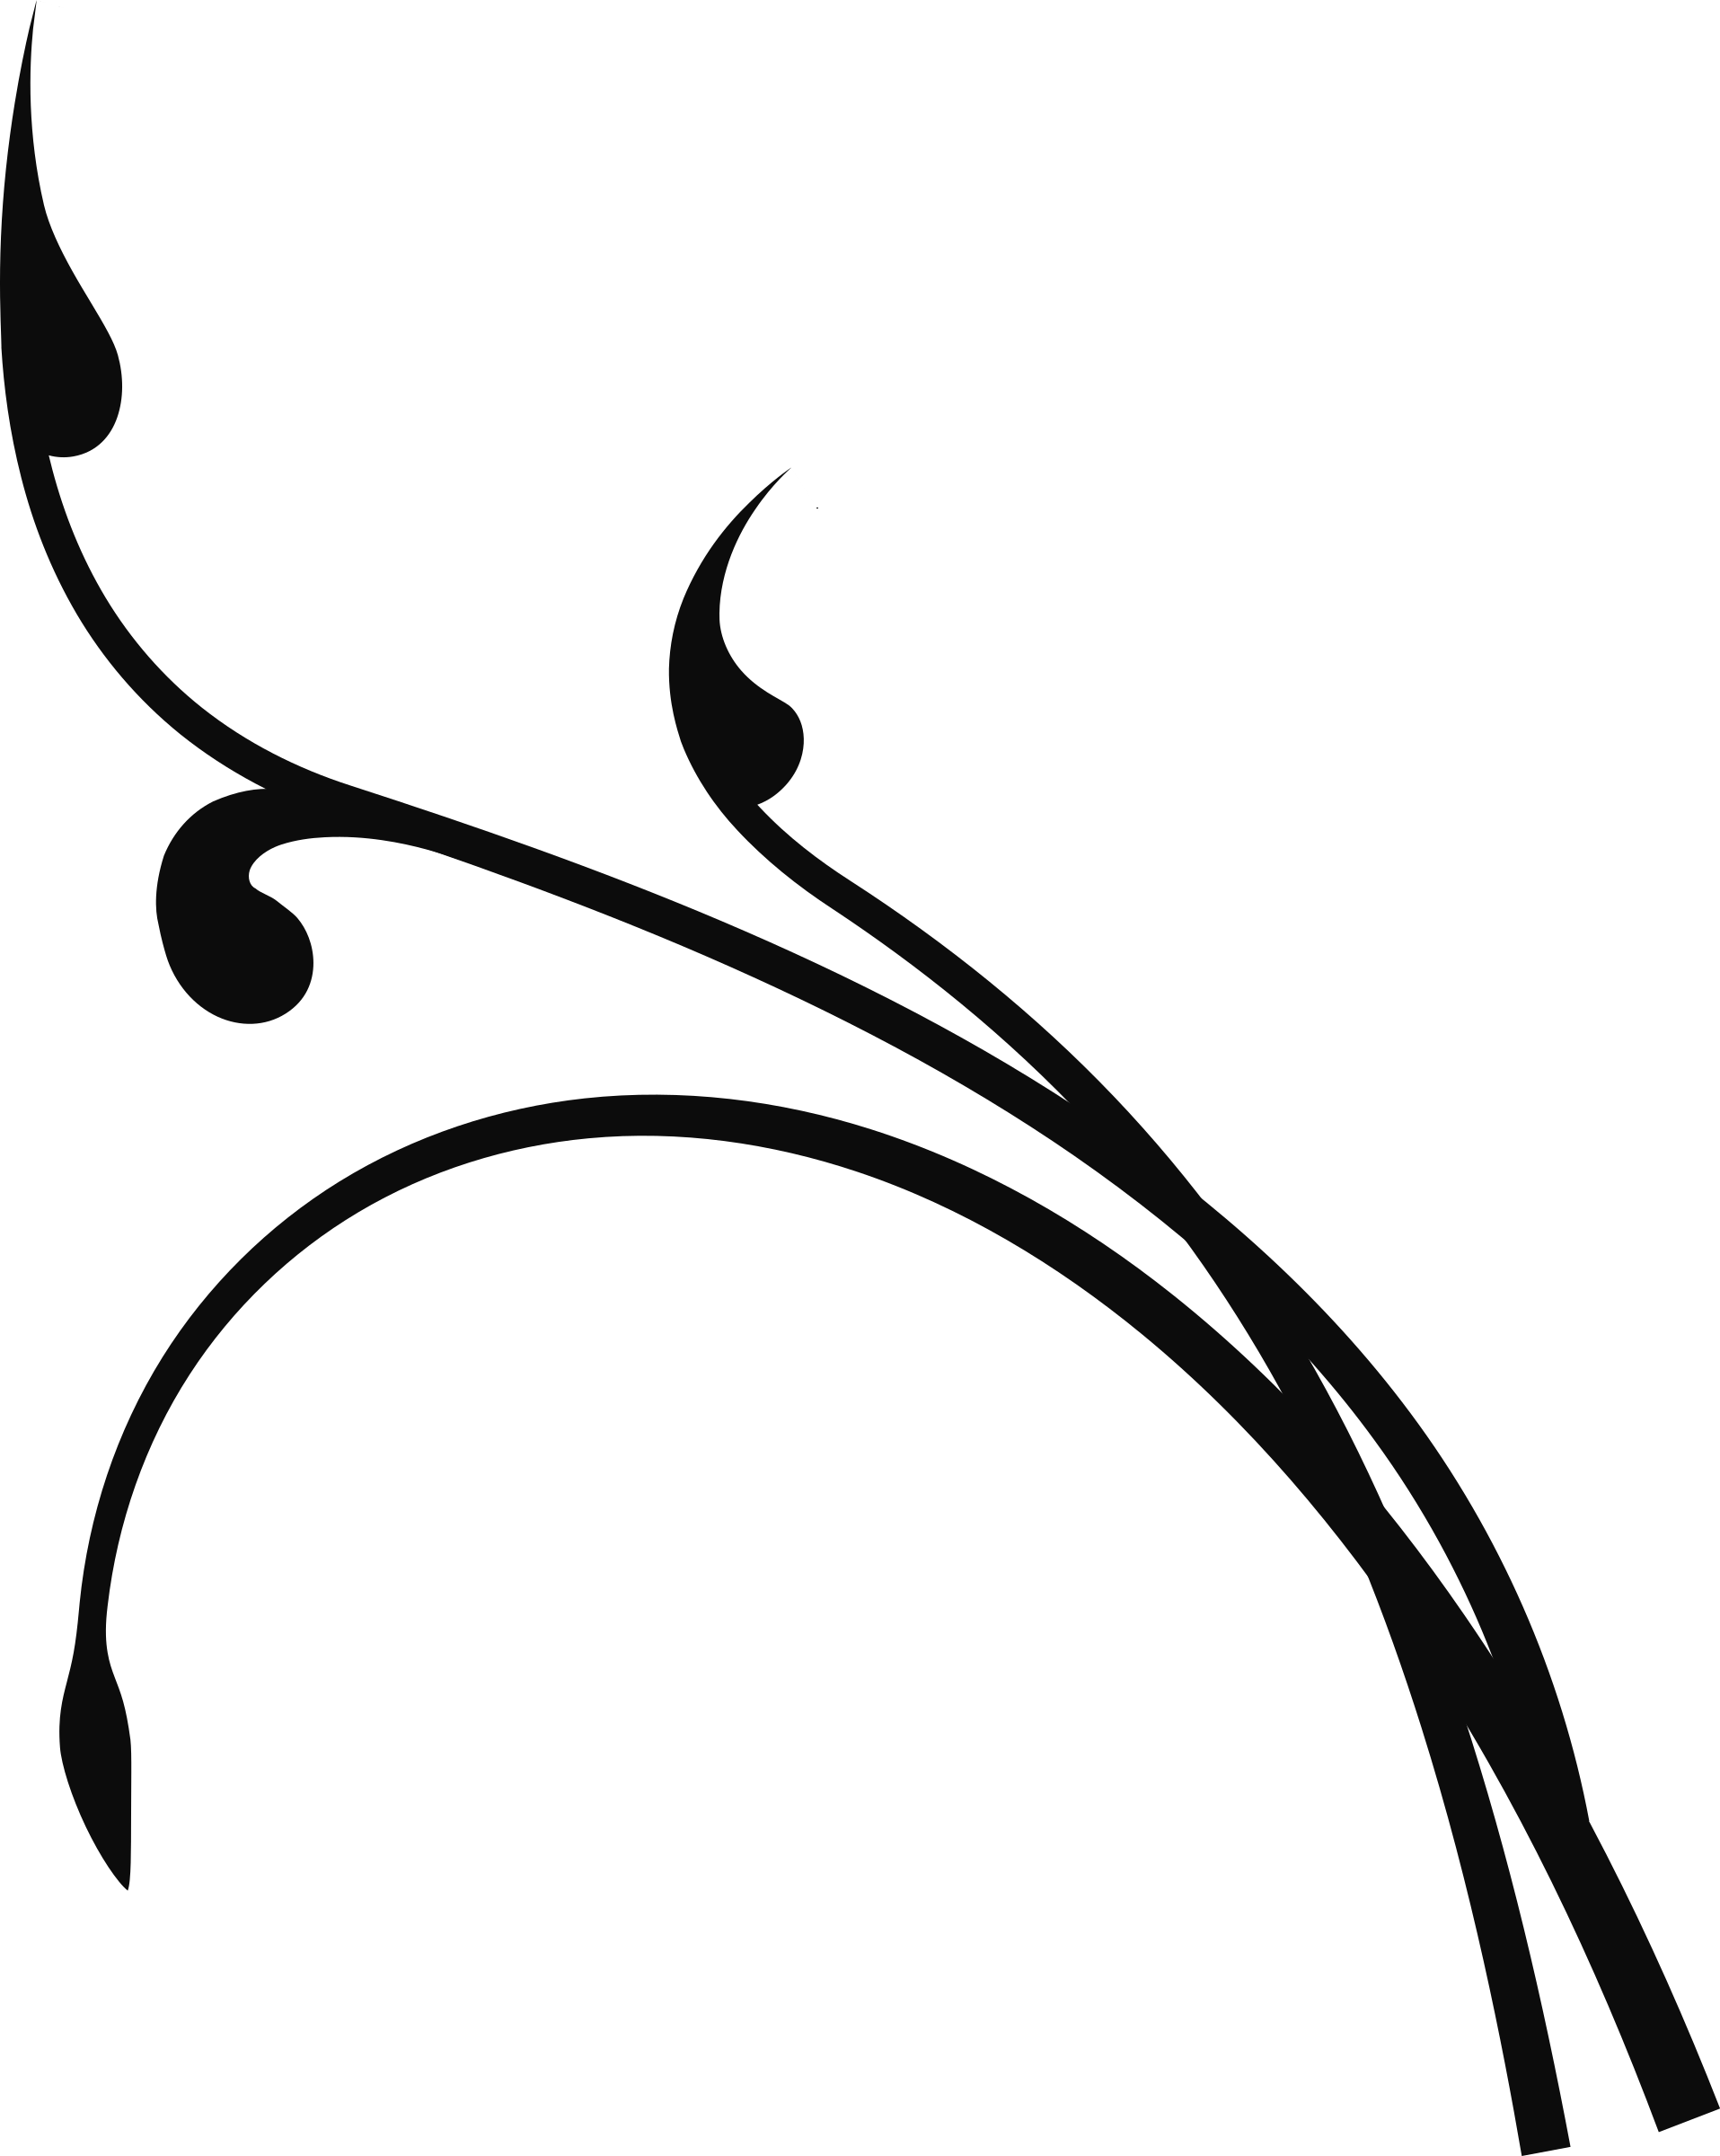 A Black And White Image Of A Swirly Design